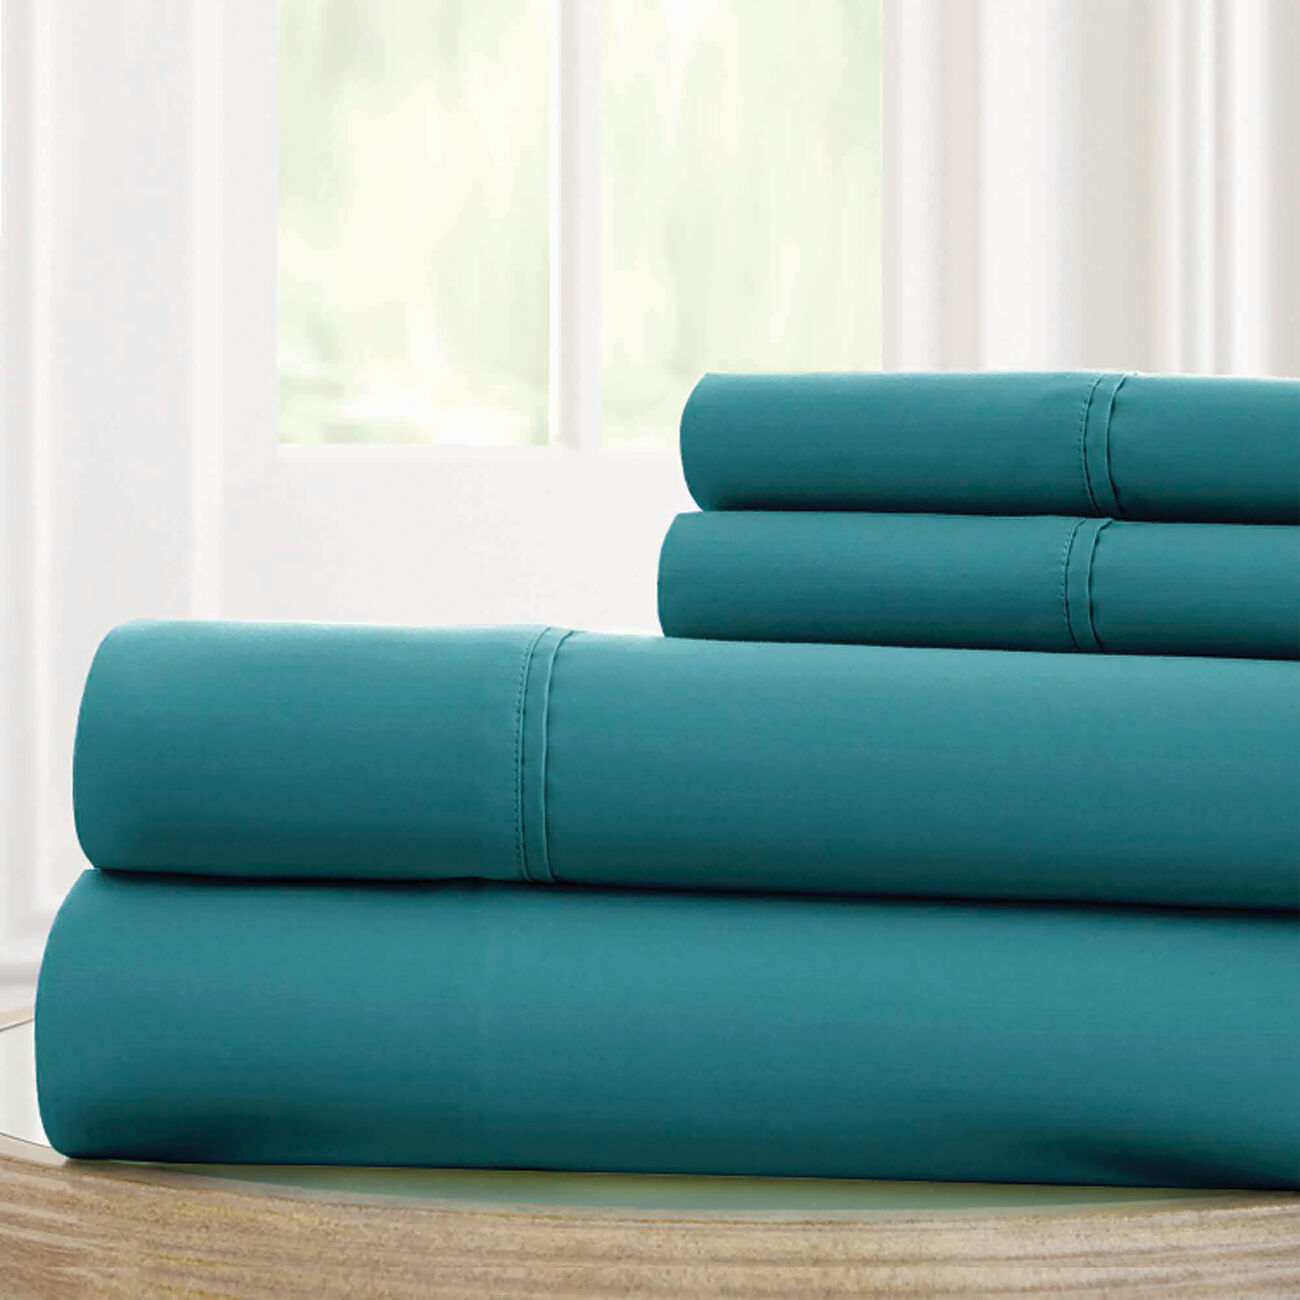 Bezons 4 Piece California King Microfiber Sheet Set with 1800 Thread Count, Teal Blue